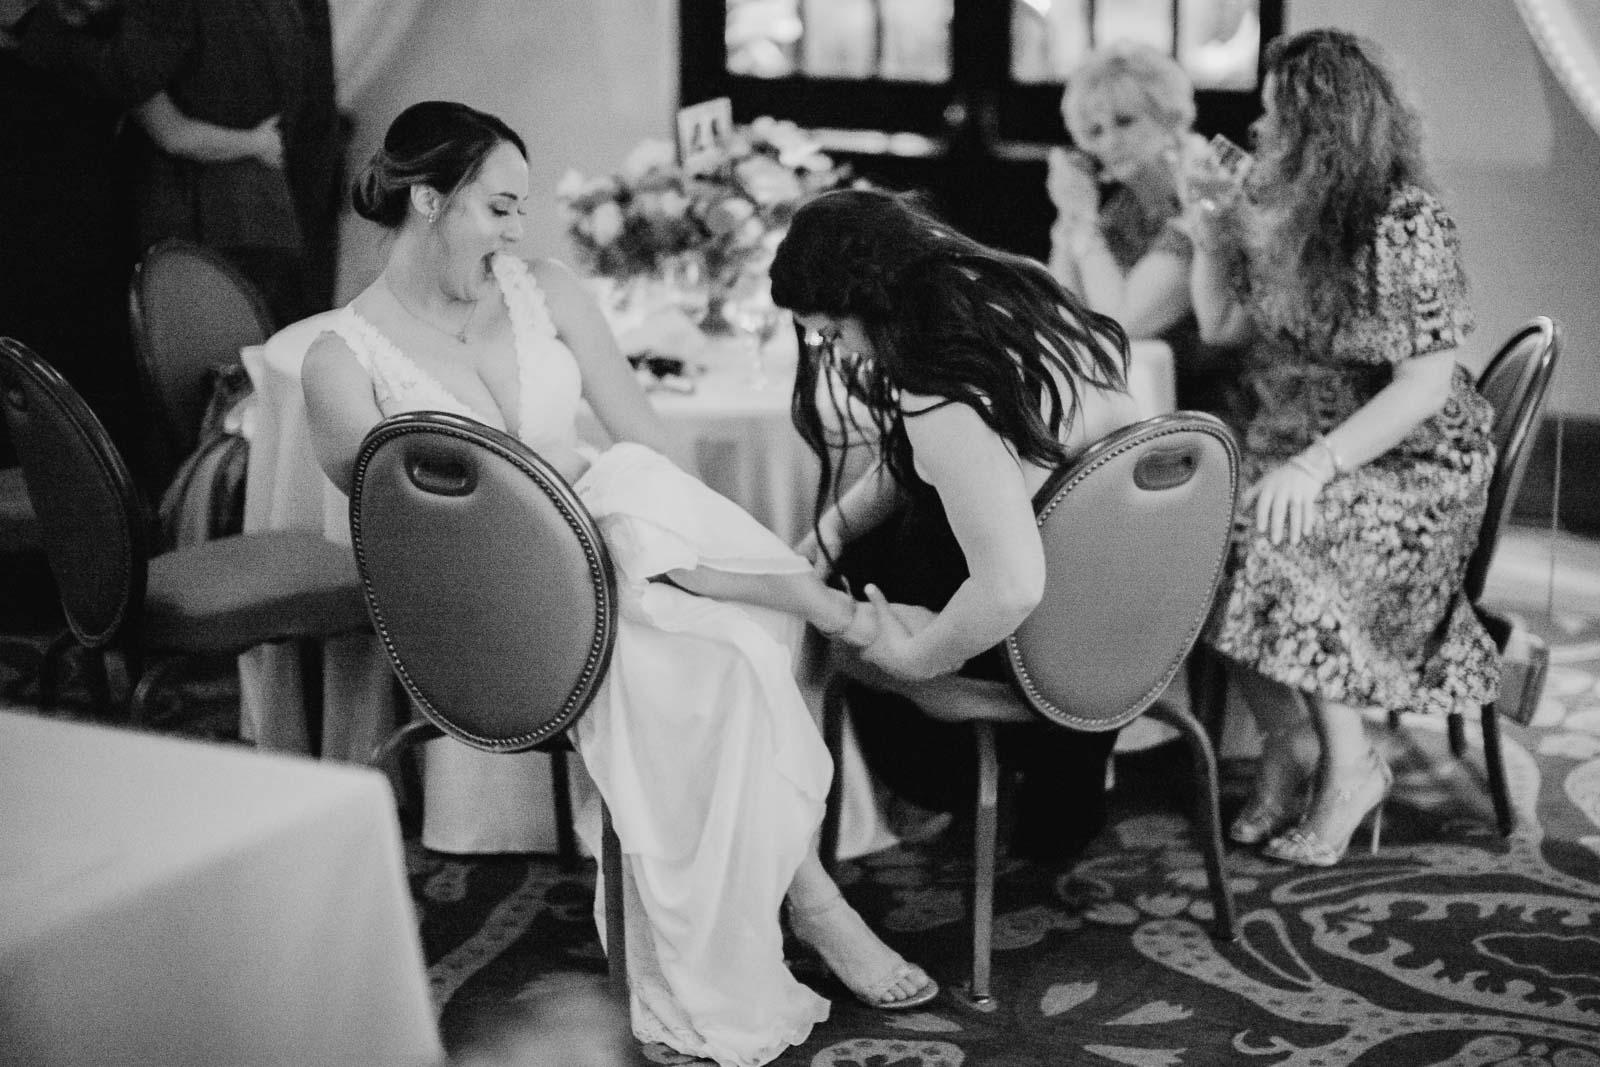 The bride has some help from a guest as she fixes and ties her shoe